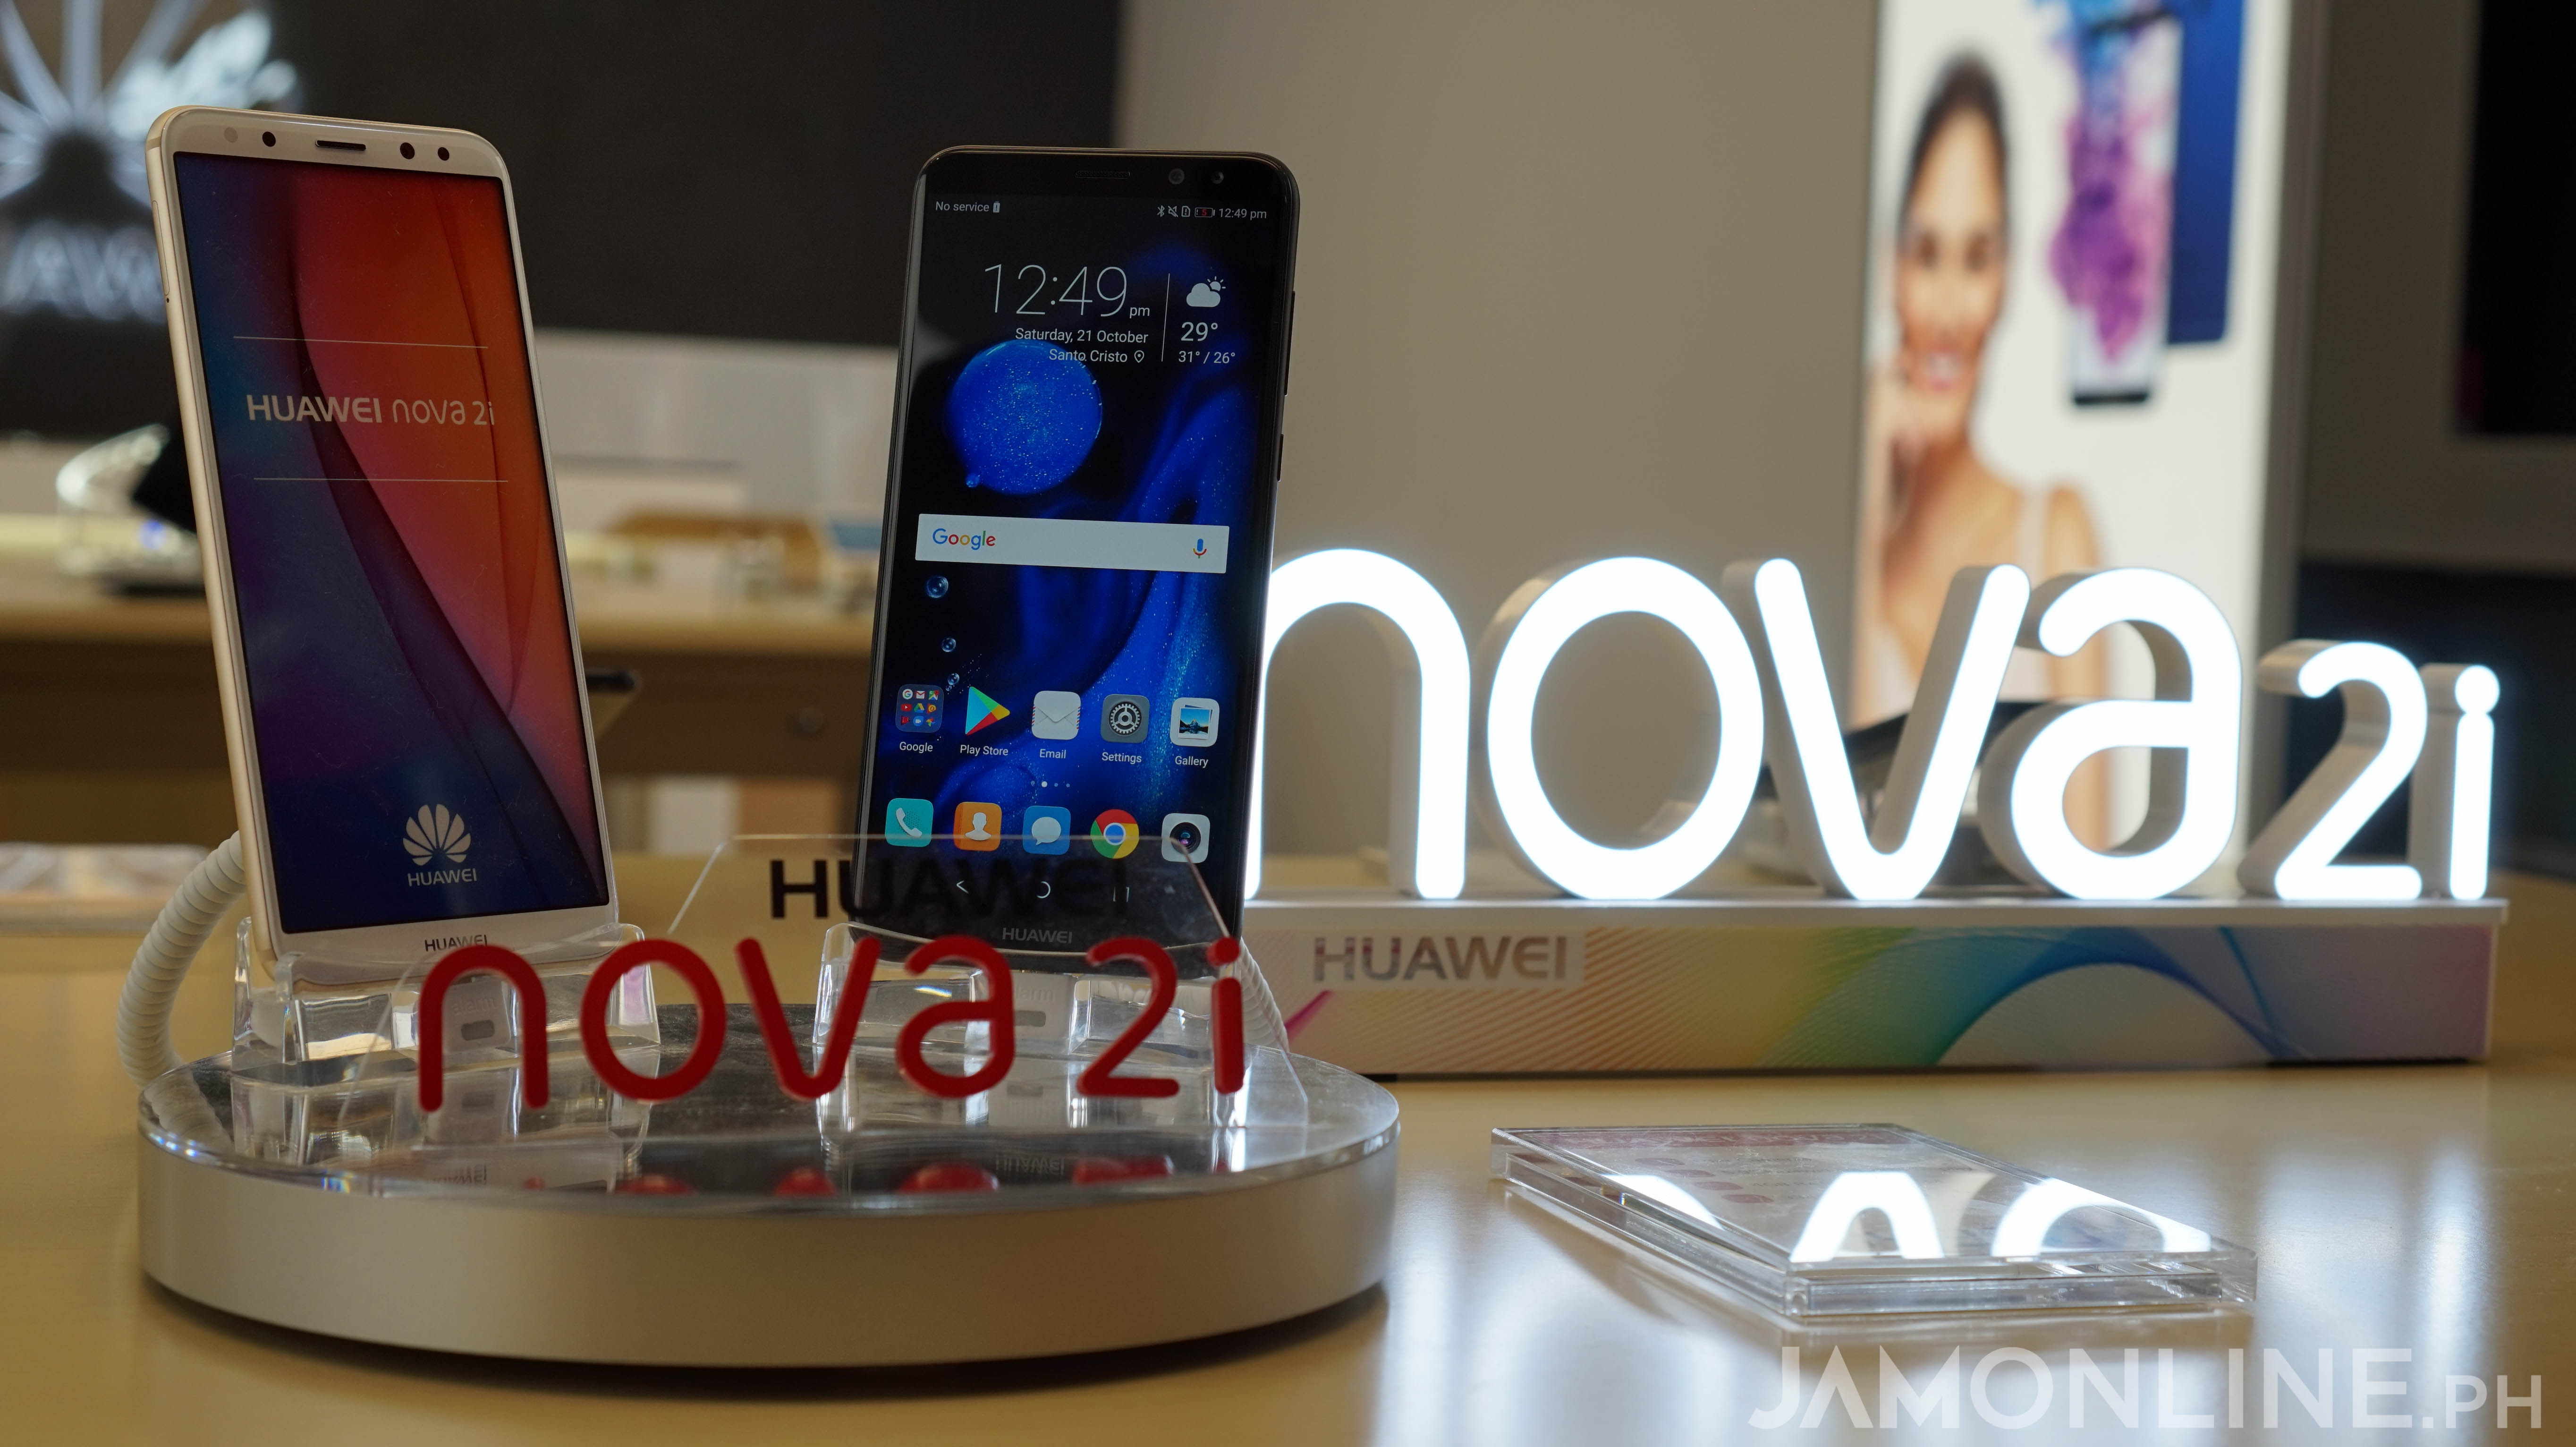 Huawei Nova 2i Launched in the Philippines - Jam Online | Philippines ...